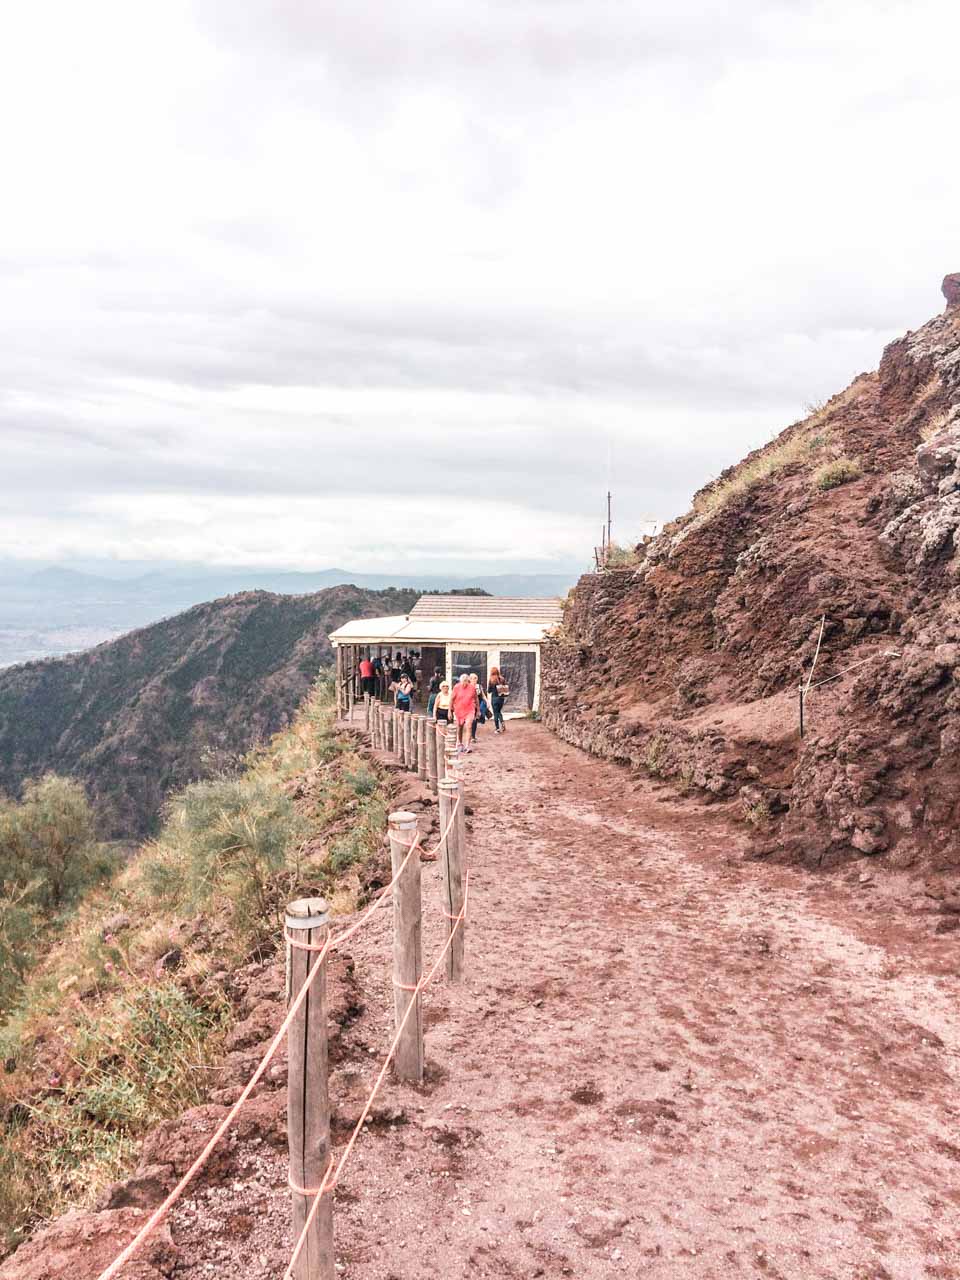 People walking on the trail leading towards the summit of Mount Vesuvius